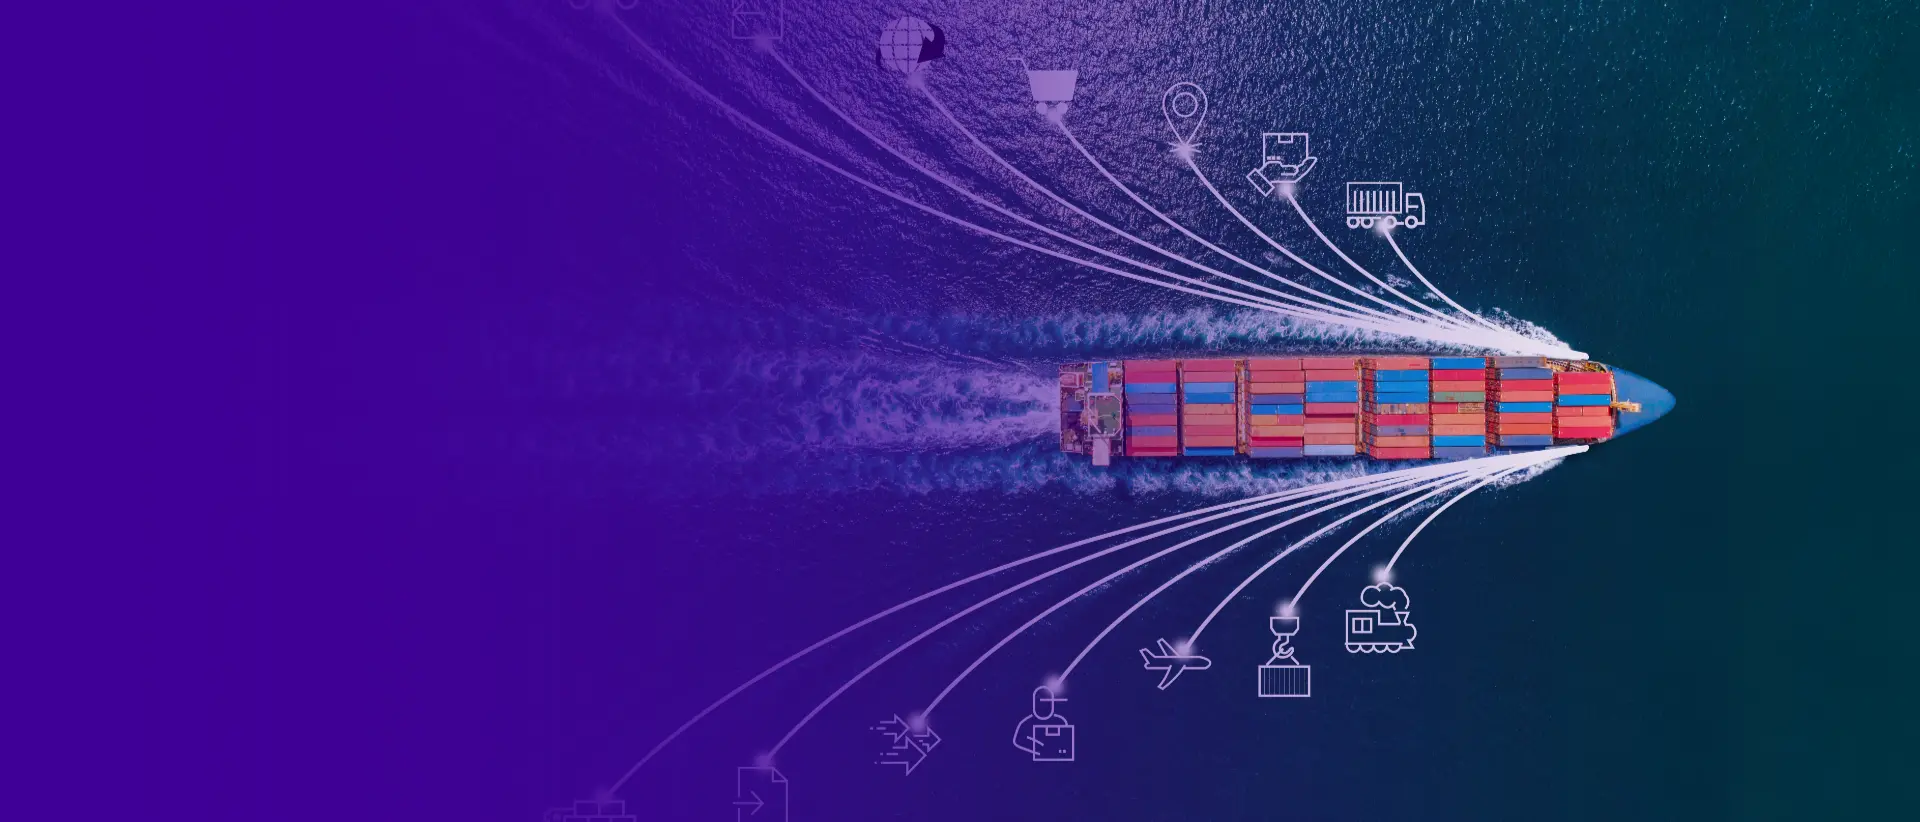 The Role of IoT in Maritime Safety: A Futurism Guide